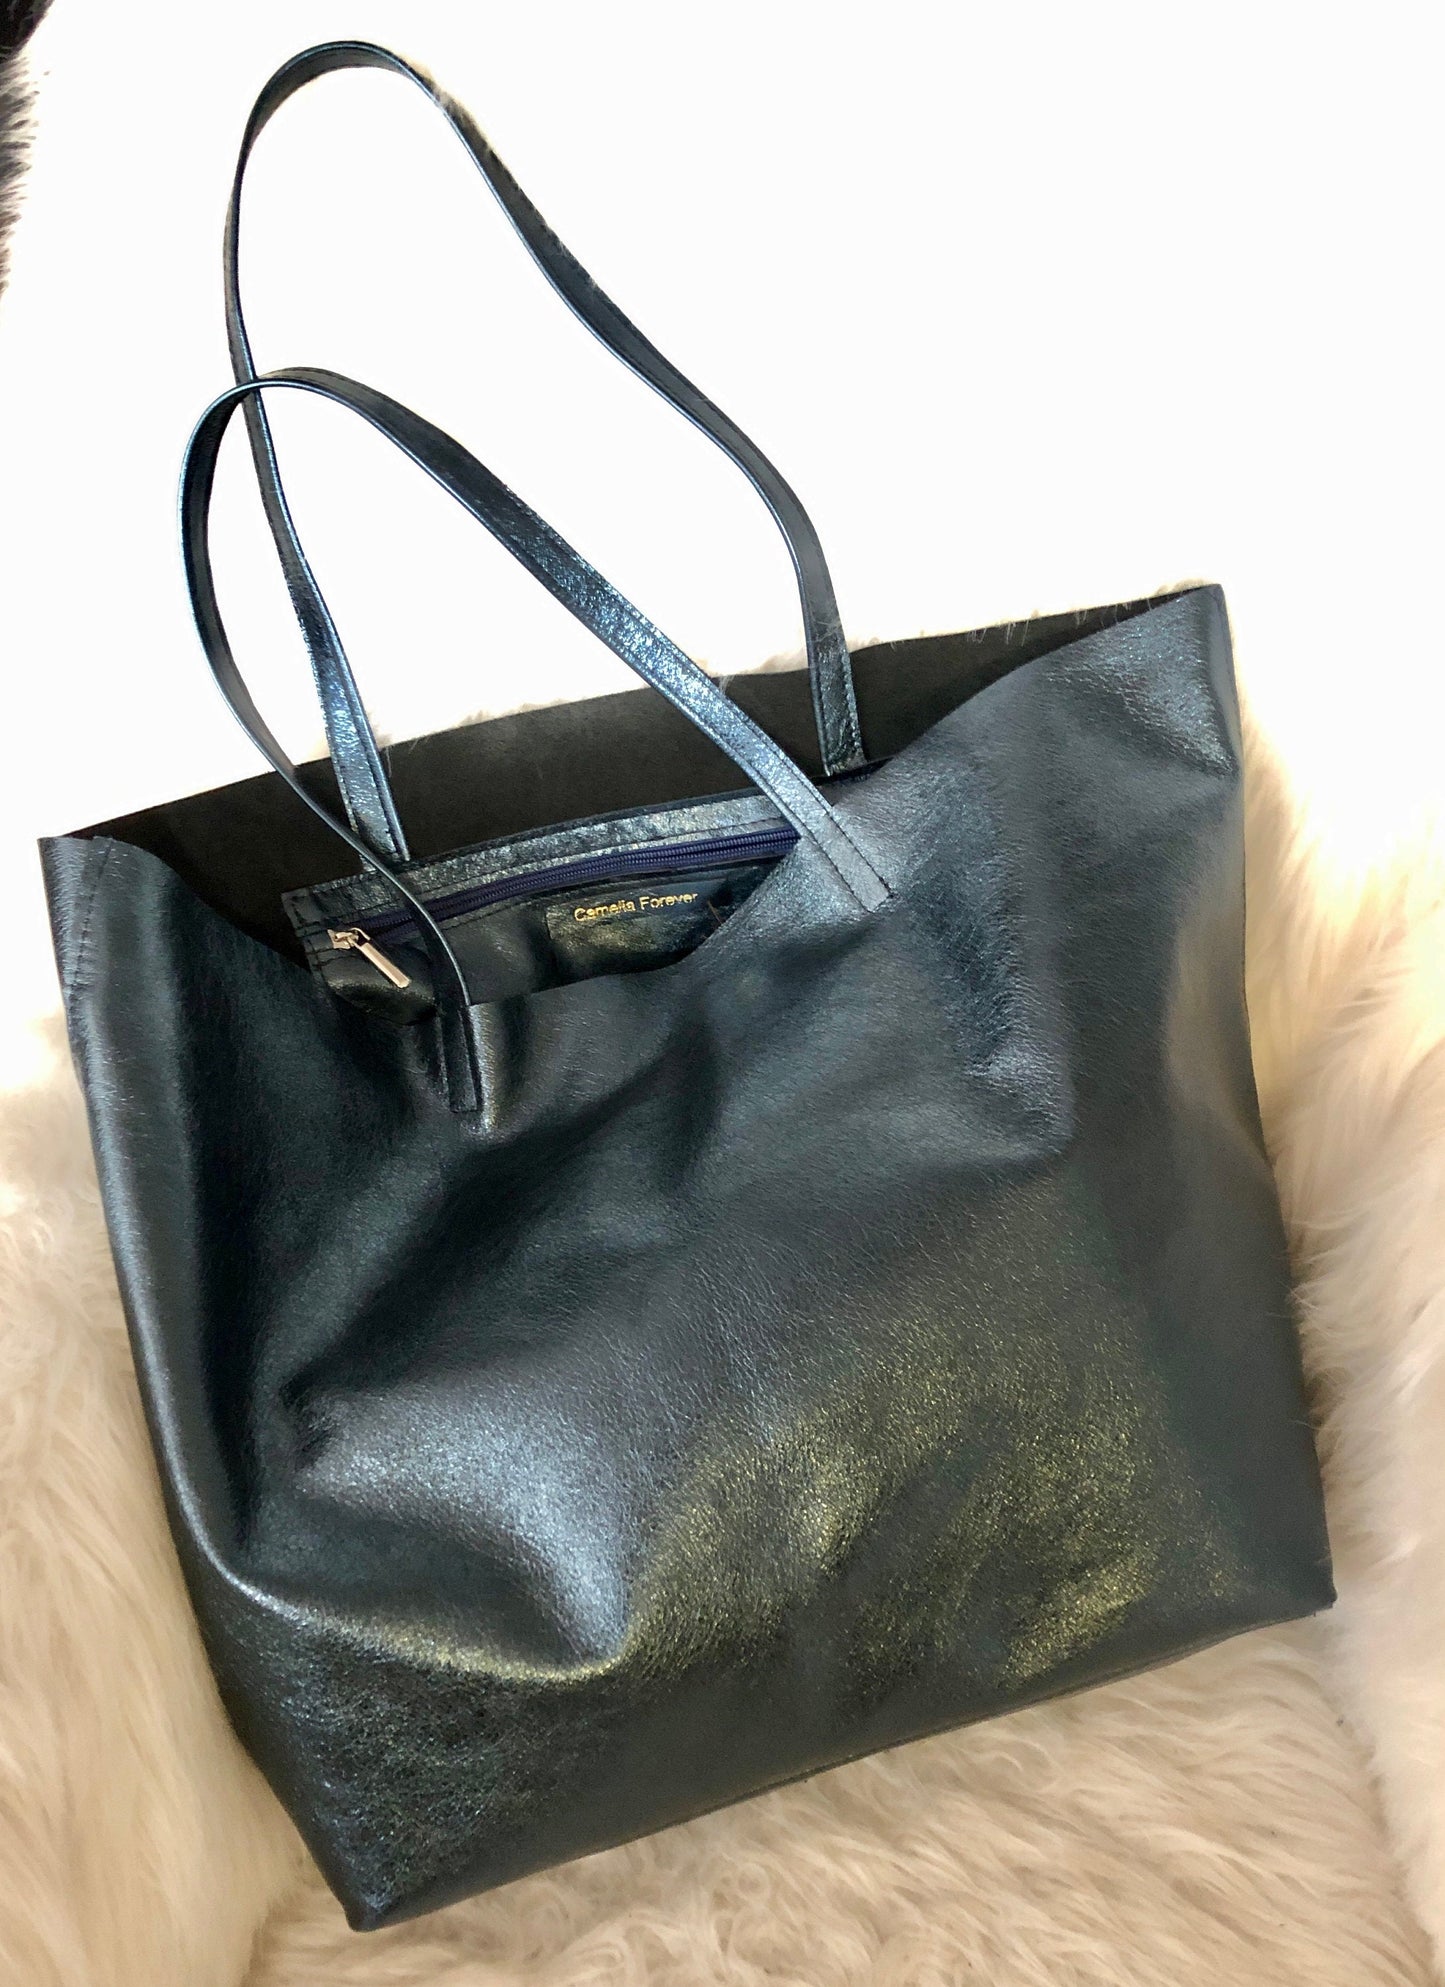 Metallic navy Italian leather large tote bag large navy sparkle leather oversize tote everyday leather shoulder purse